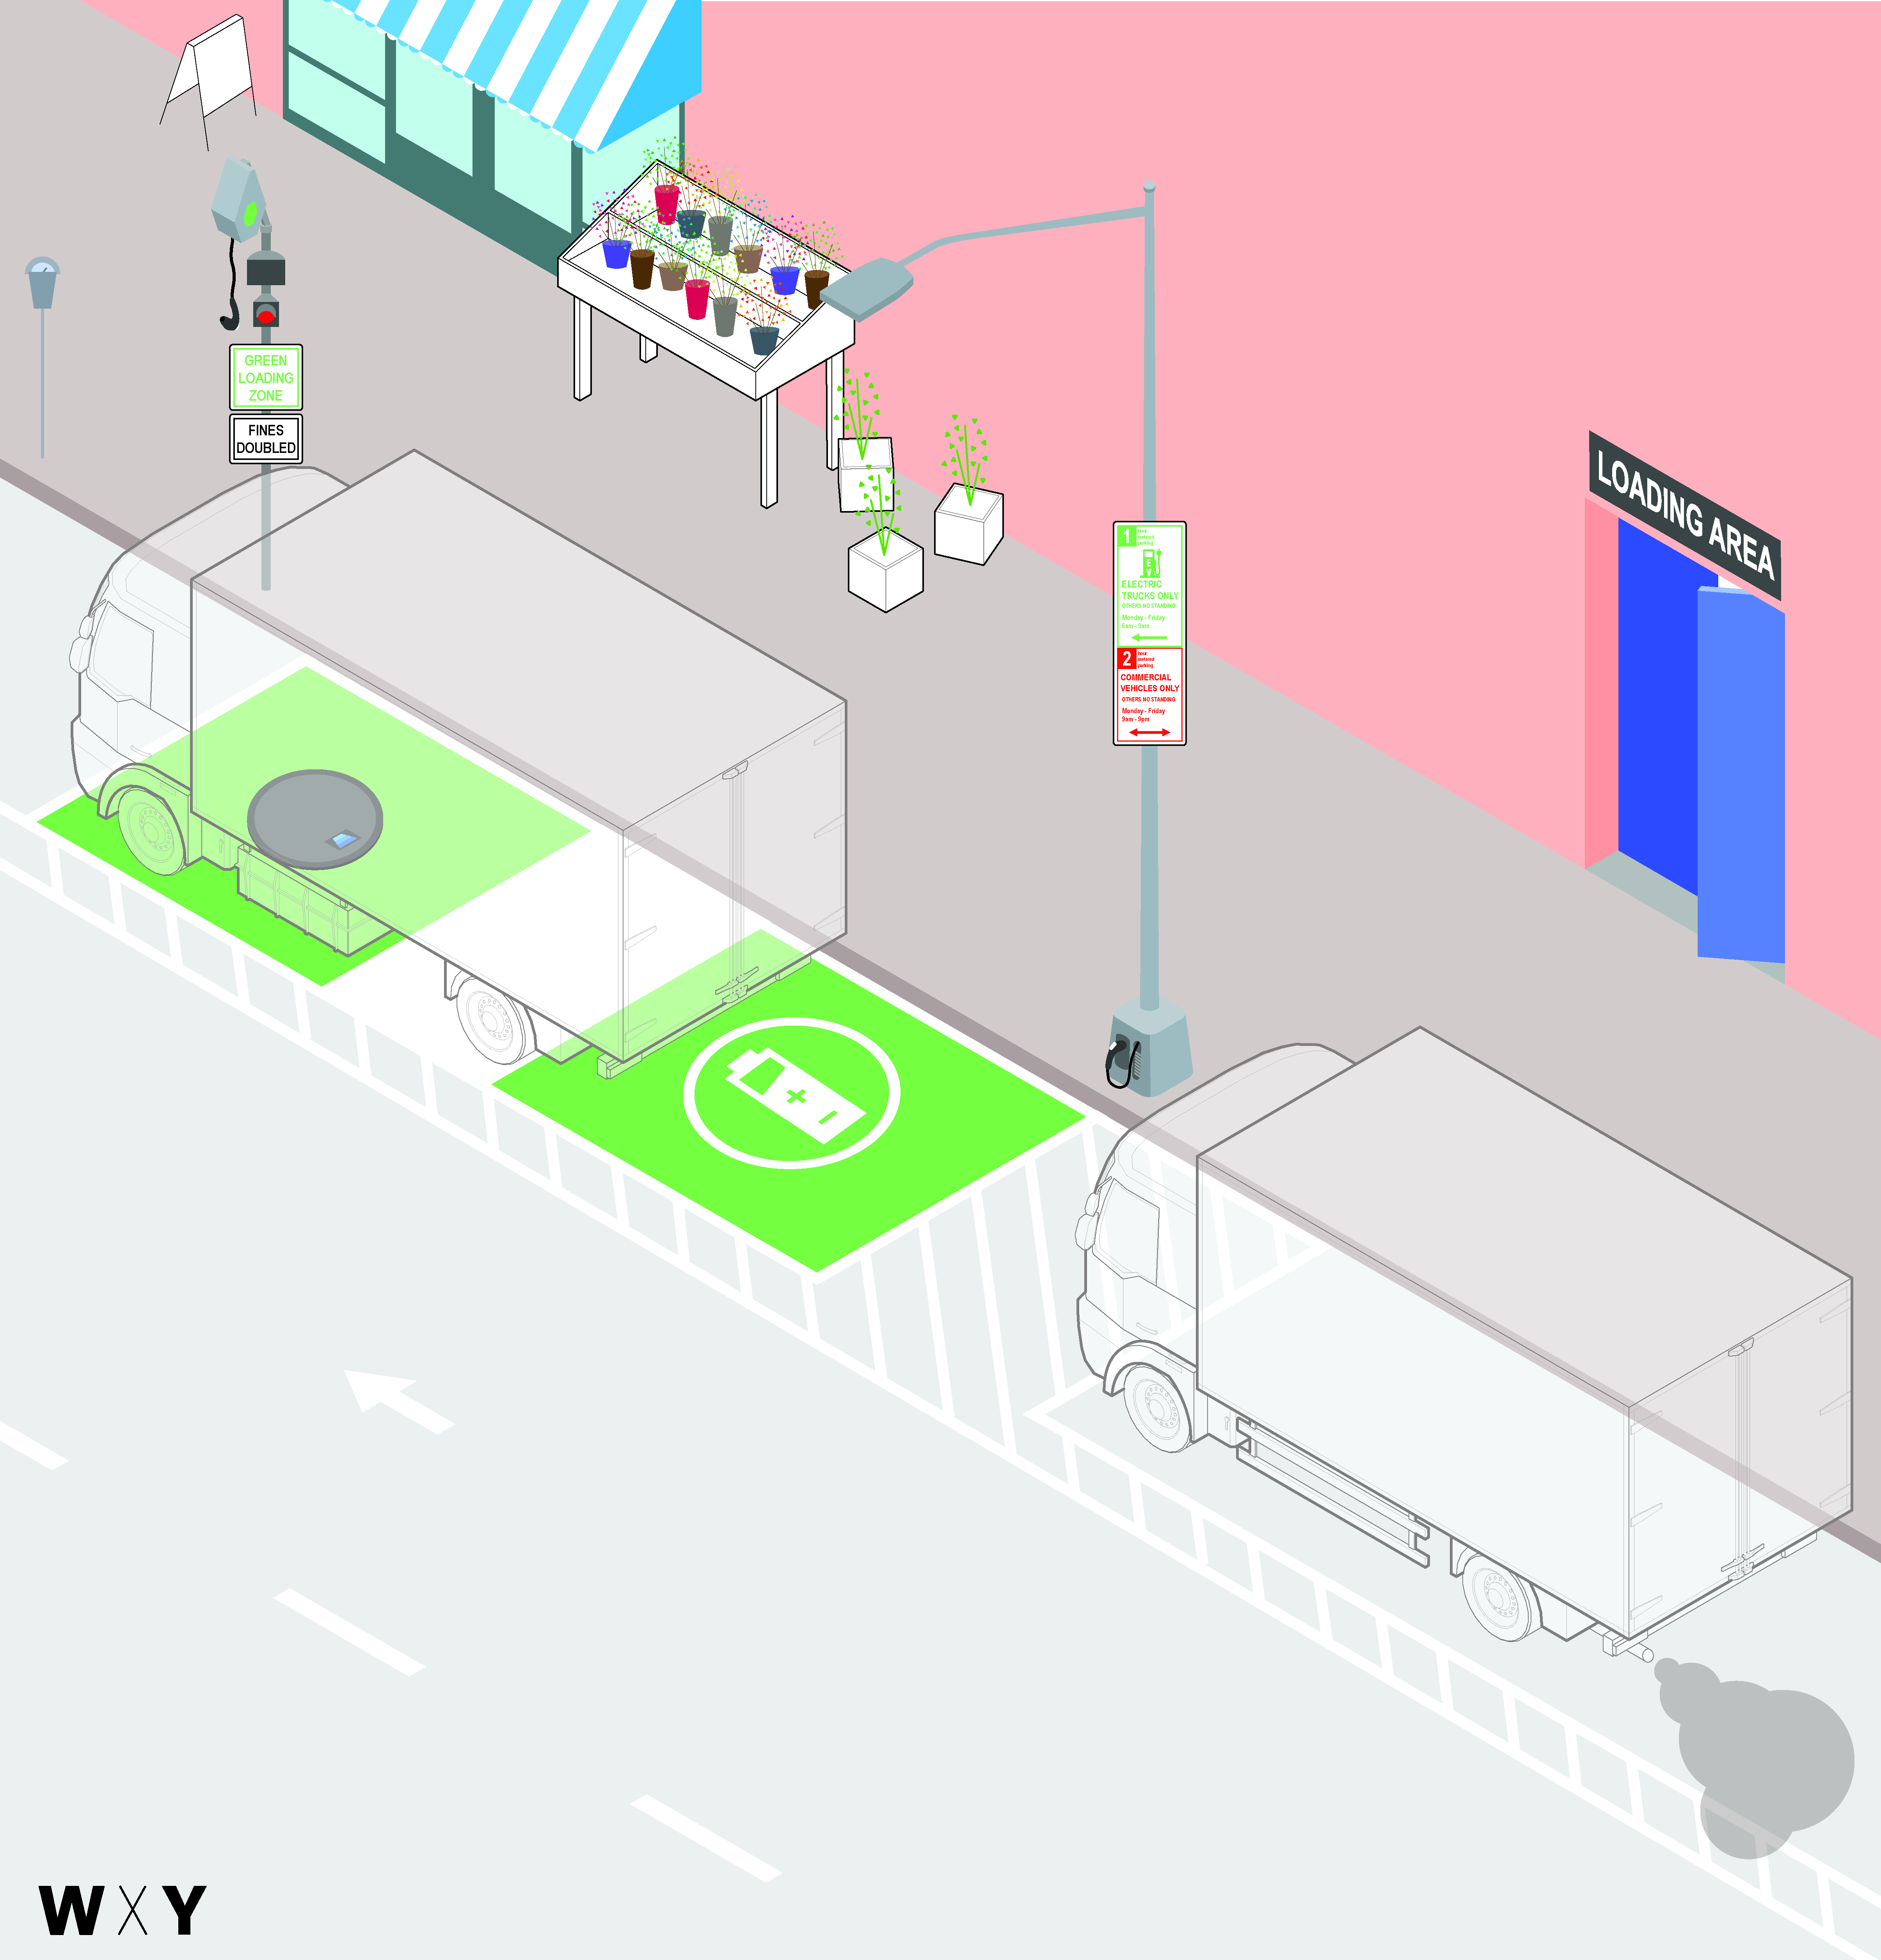 Rendering of a Green Loading Zone (WXY)